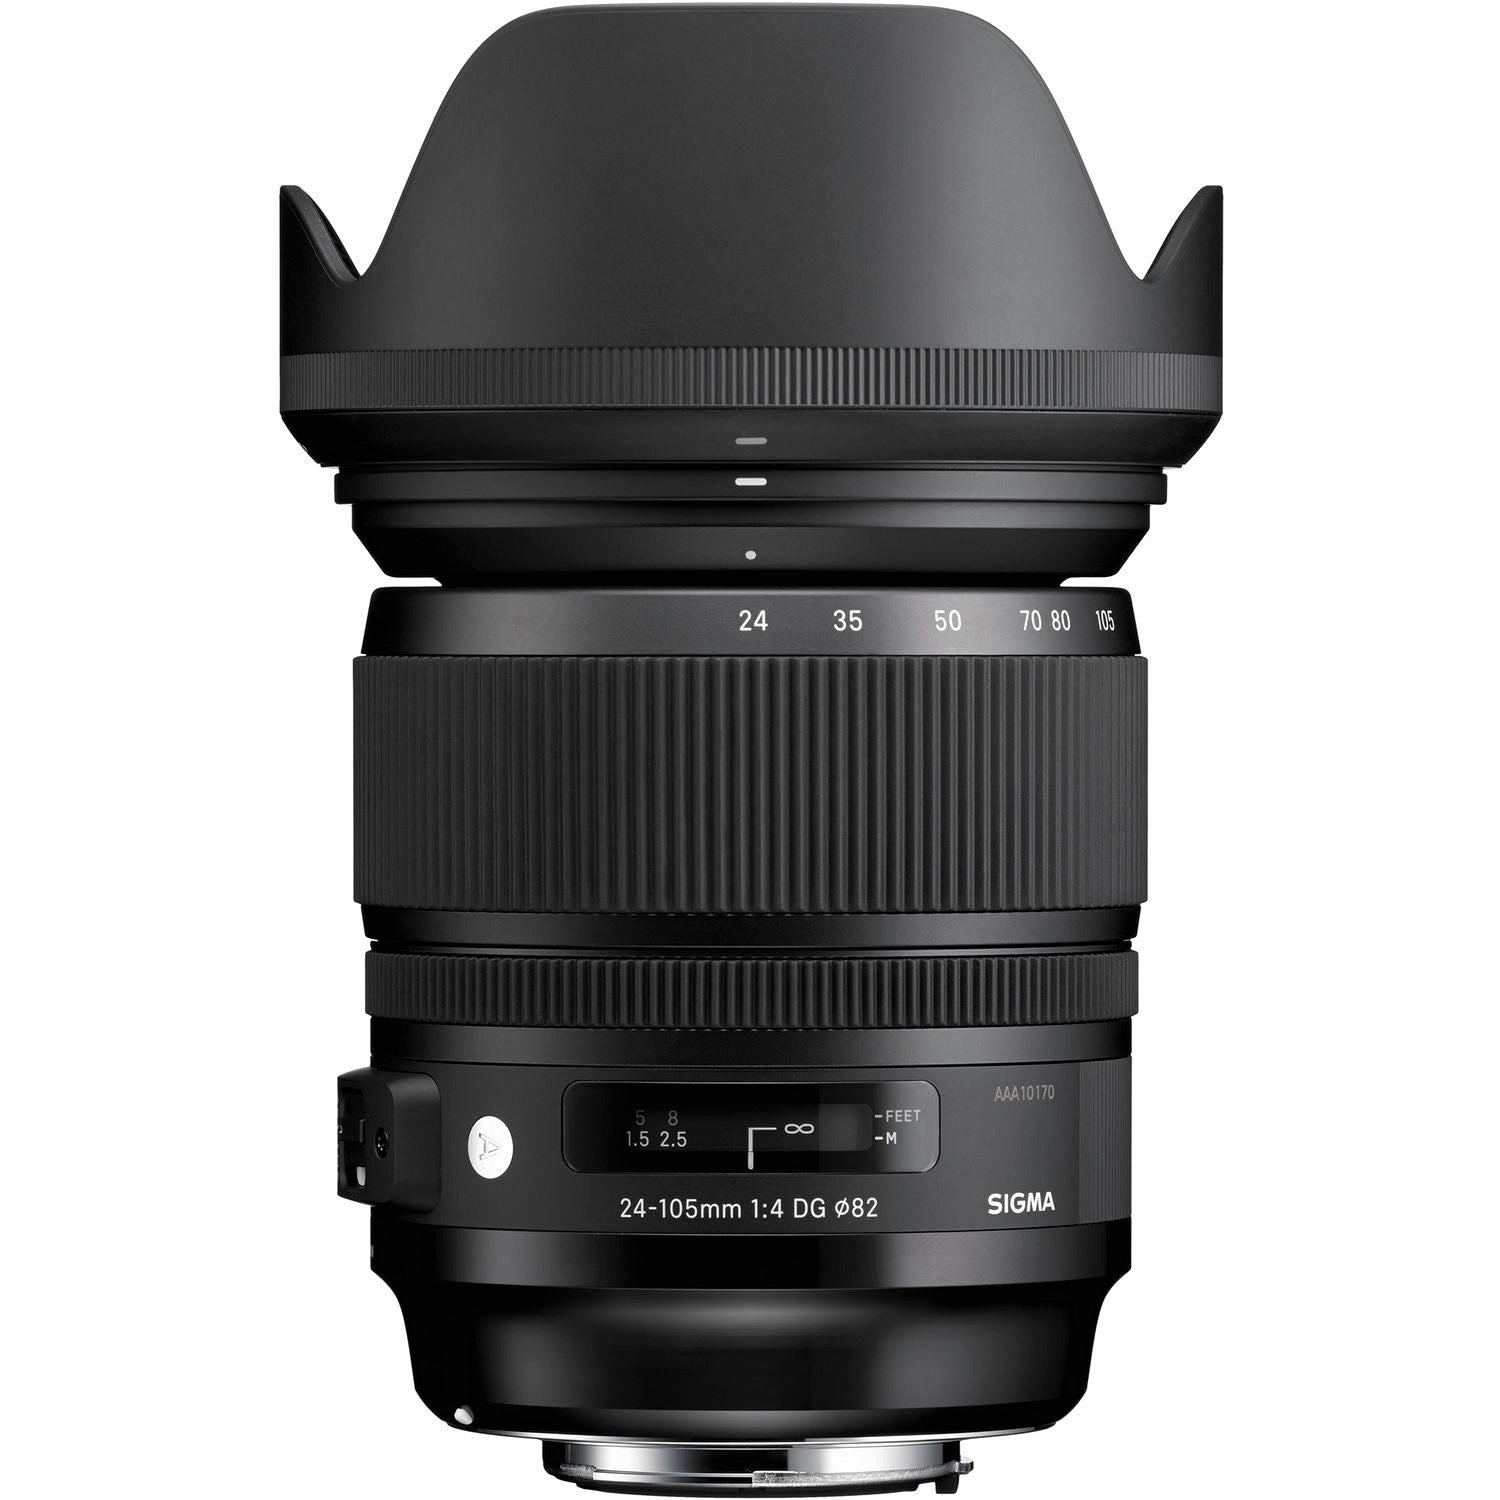 Sigma 24-105mm F4.0 DG OS HSM Art Lens (Sigma SA) with Attached Lens Hood on the Top